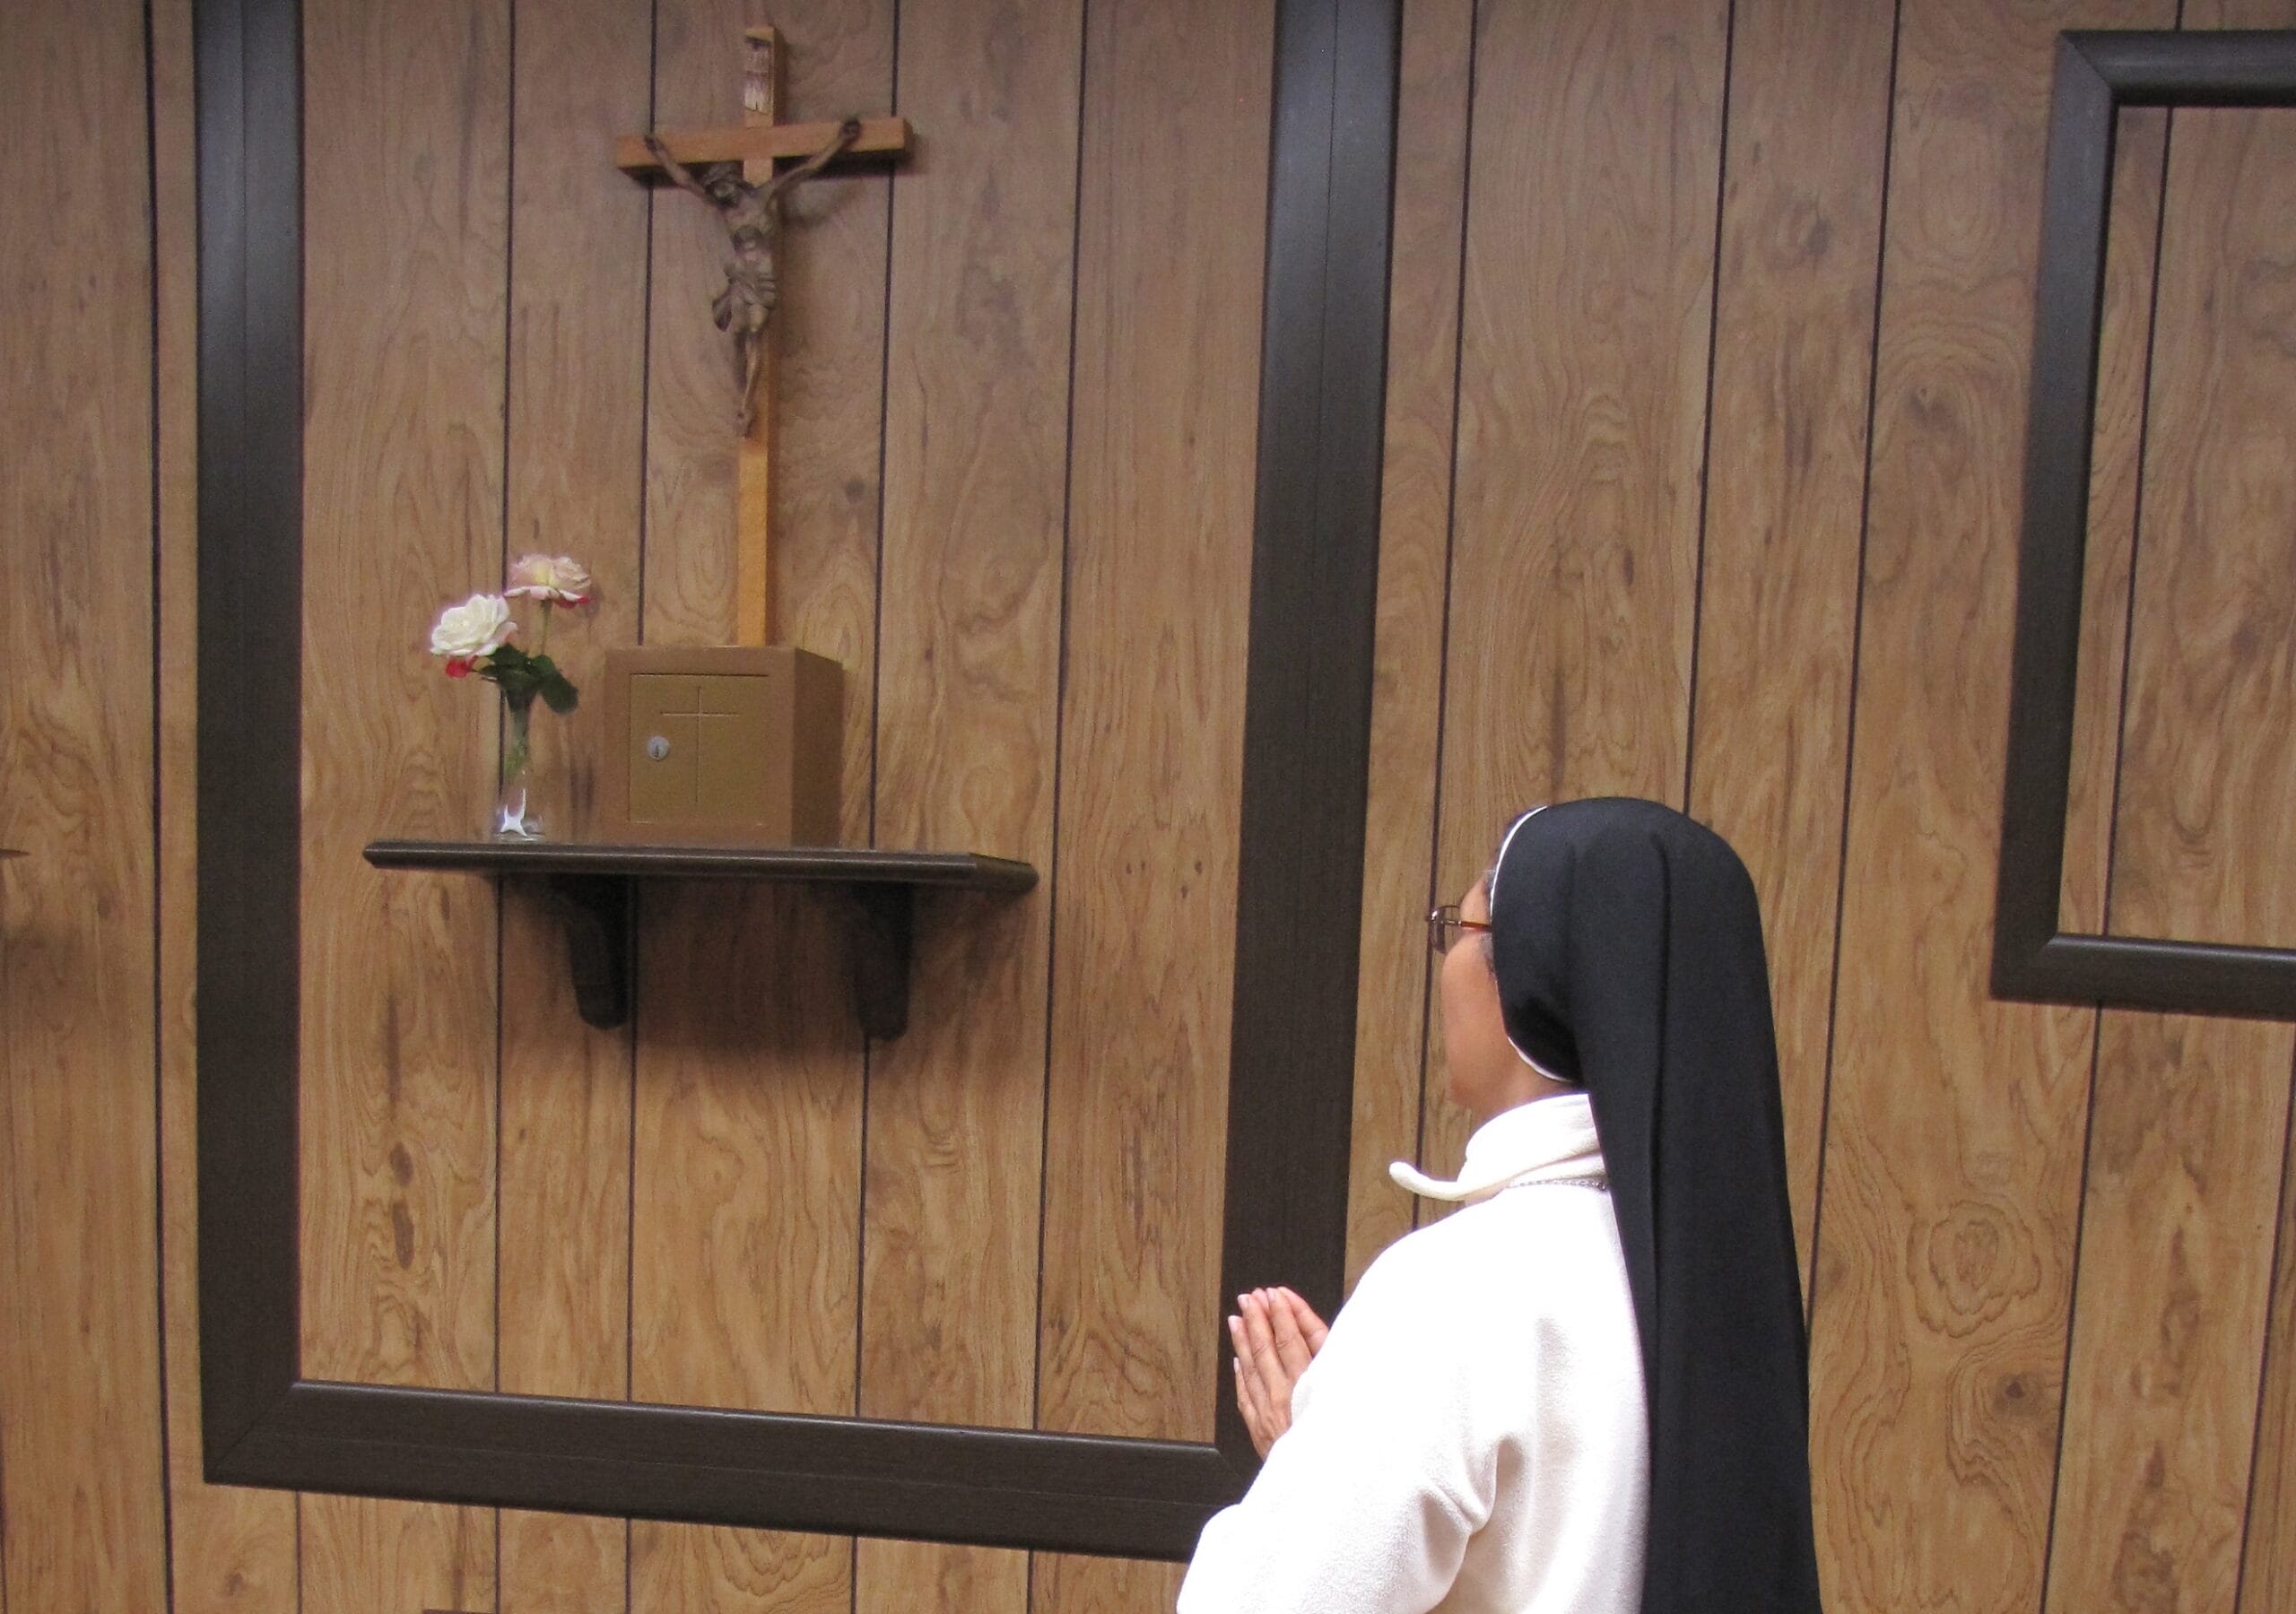 World day of prayer for vocations